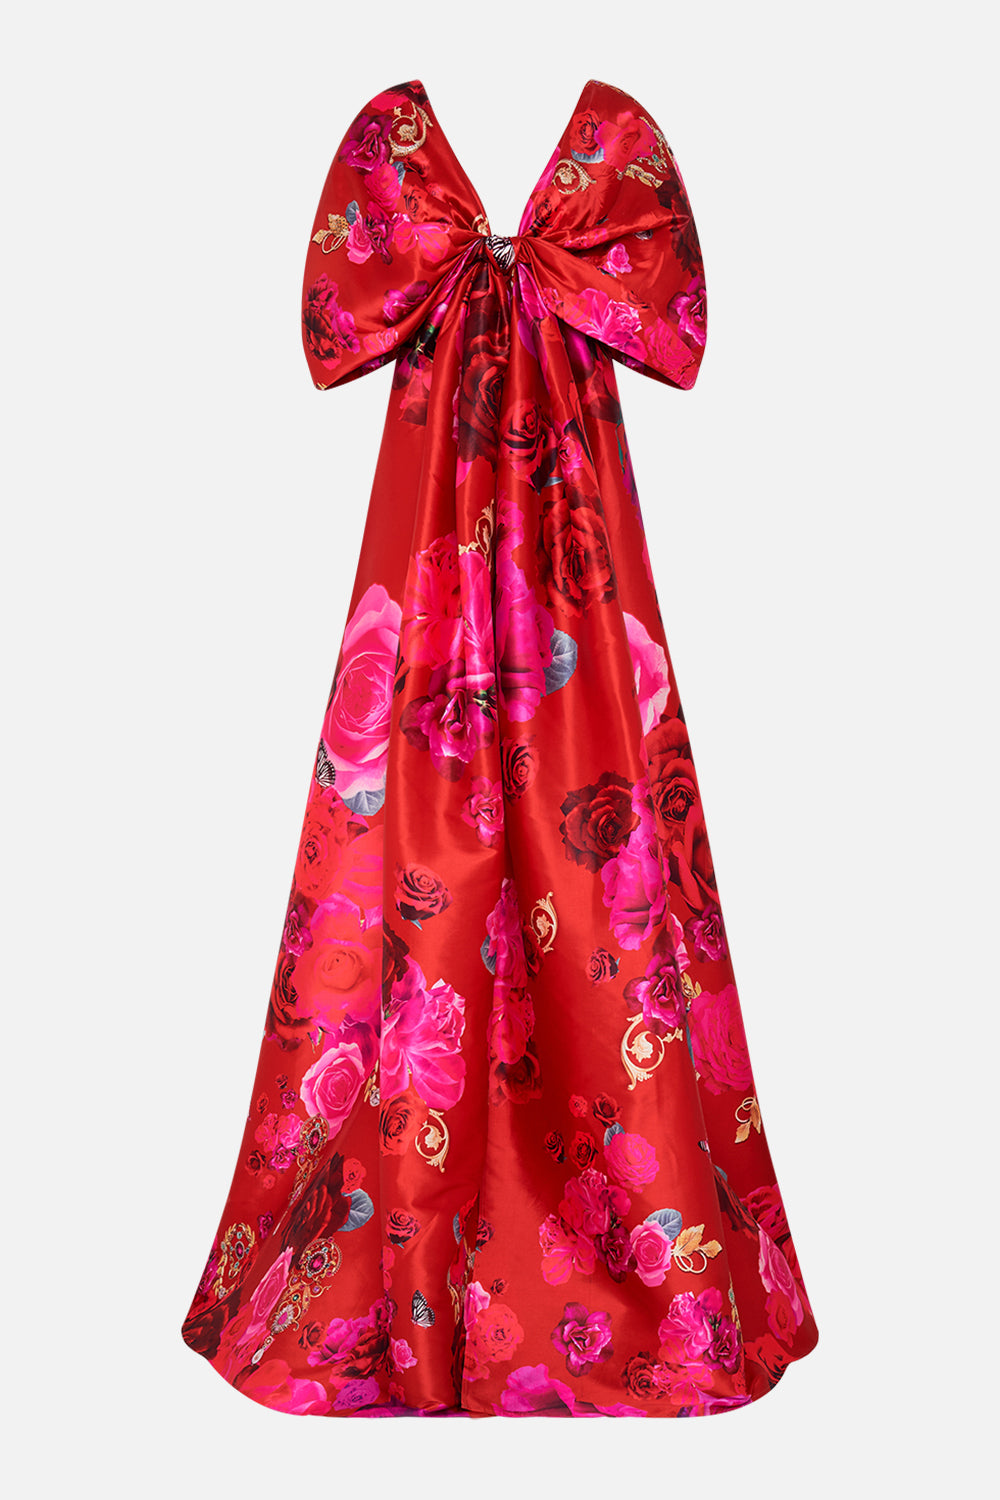 Product view of CAMILLA taffeta maxi dress with bow detail in An Italian Rosa print  